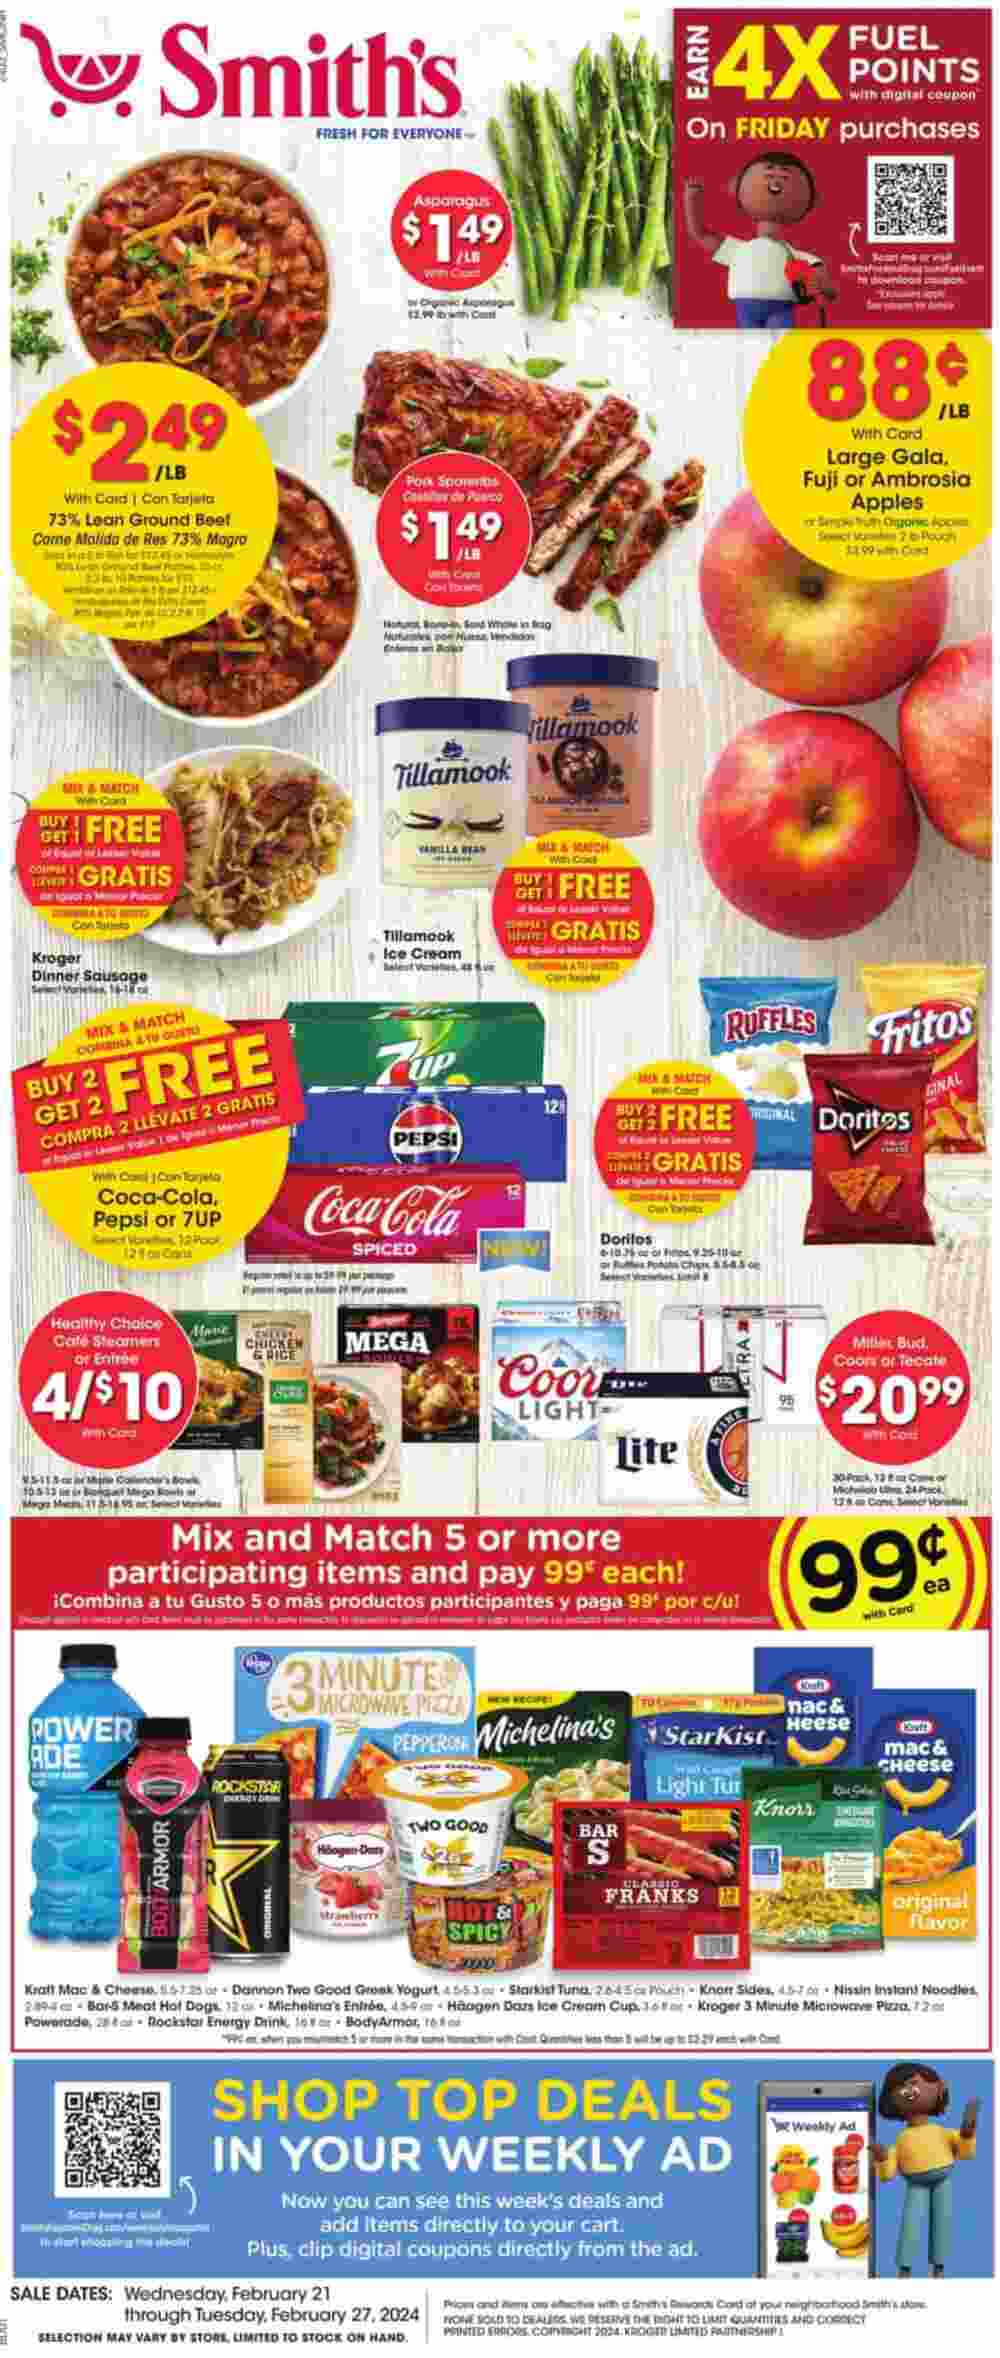 Smith's Weekly Ad February 21 to February 27, 2024 1 – smiths ad 1 5